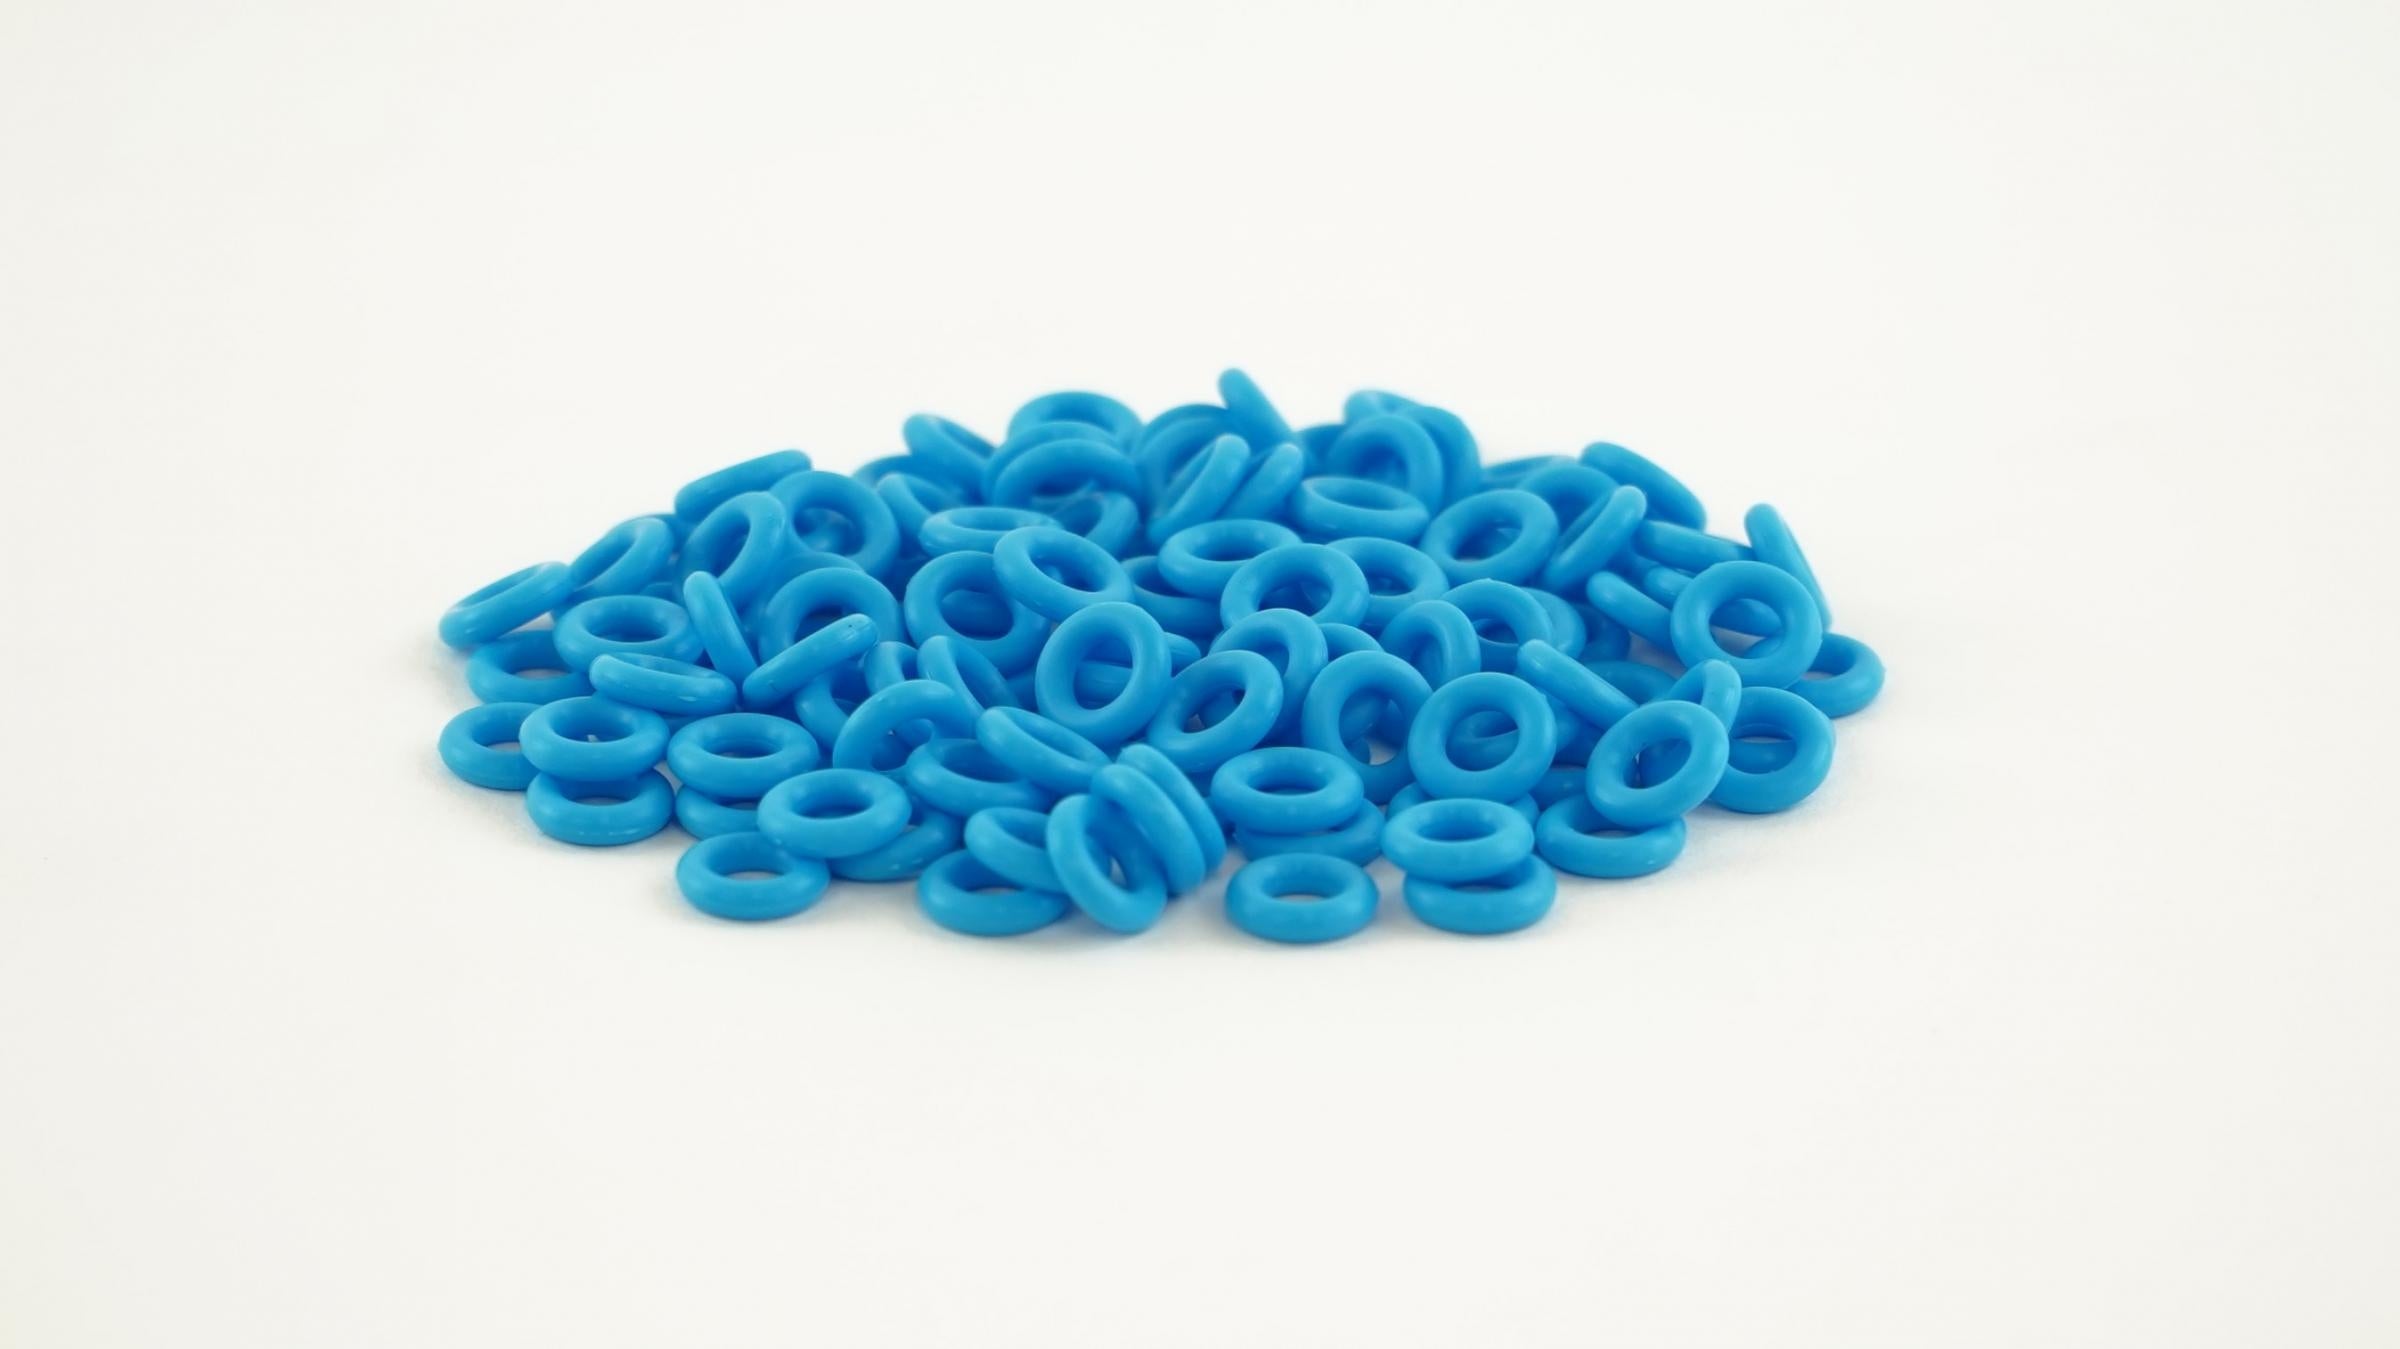 MK Pro Rings Silicone Switch Dampening O-rings 70A 2.5mm (120 Pack) MKQ97B5MG3 |0|